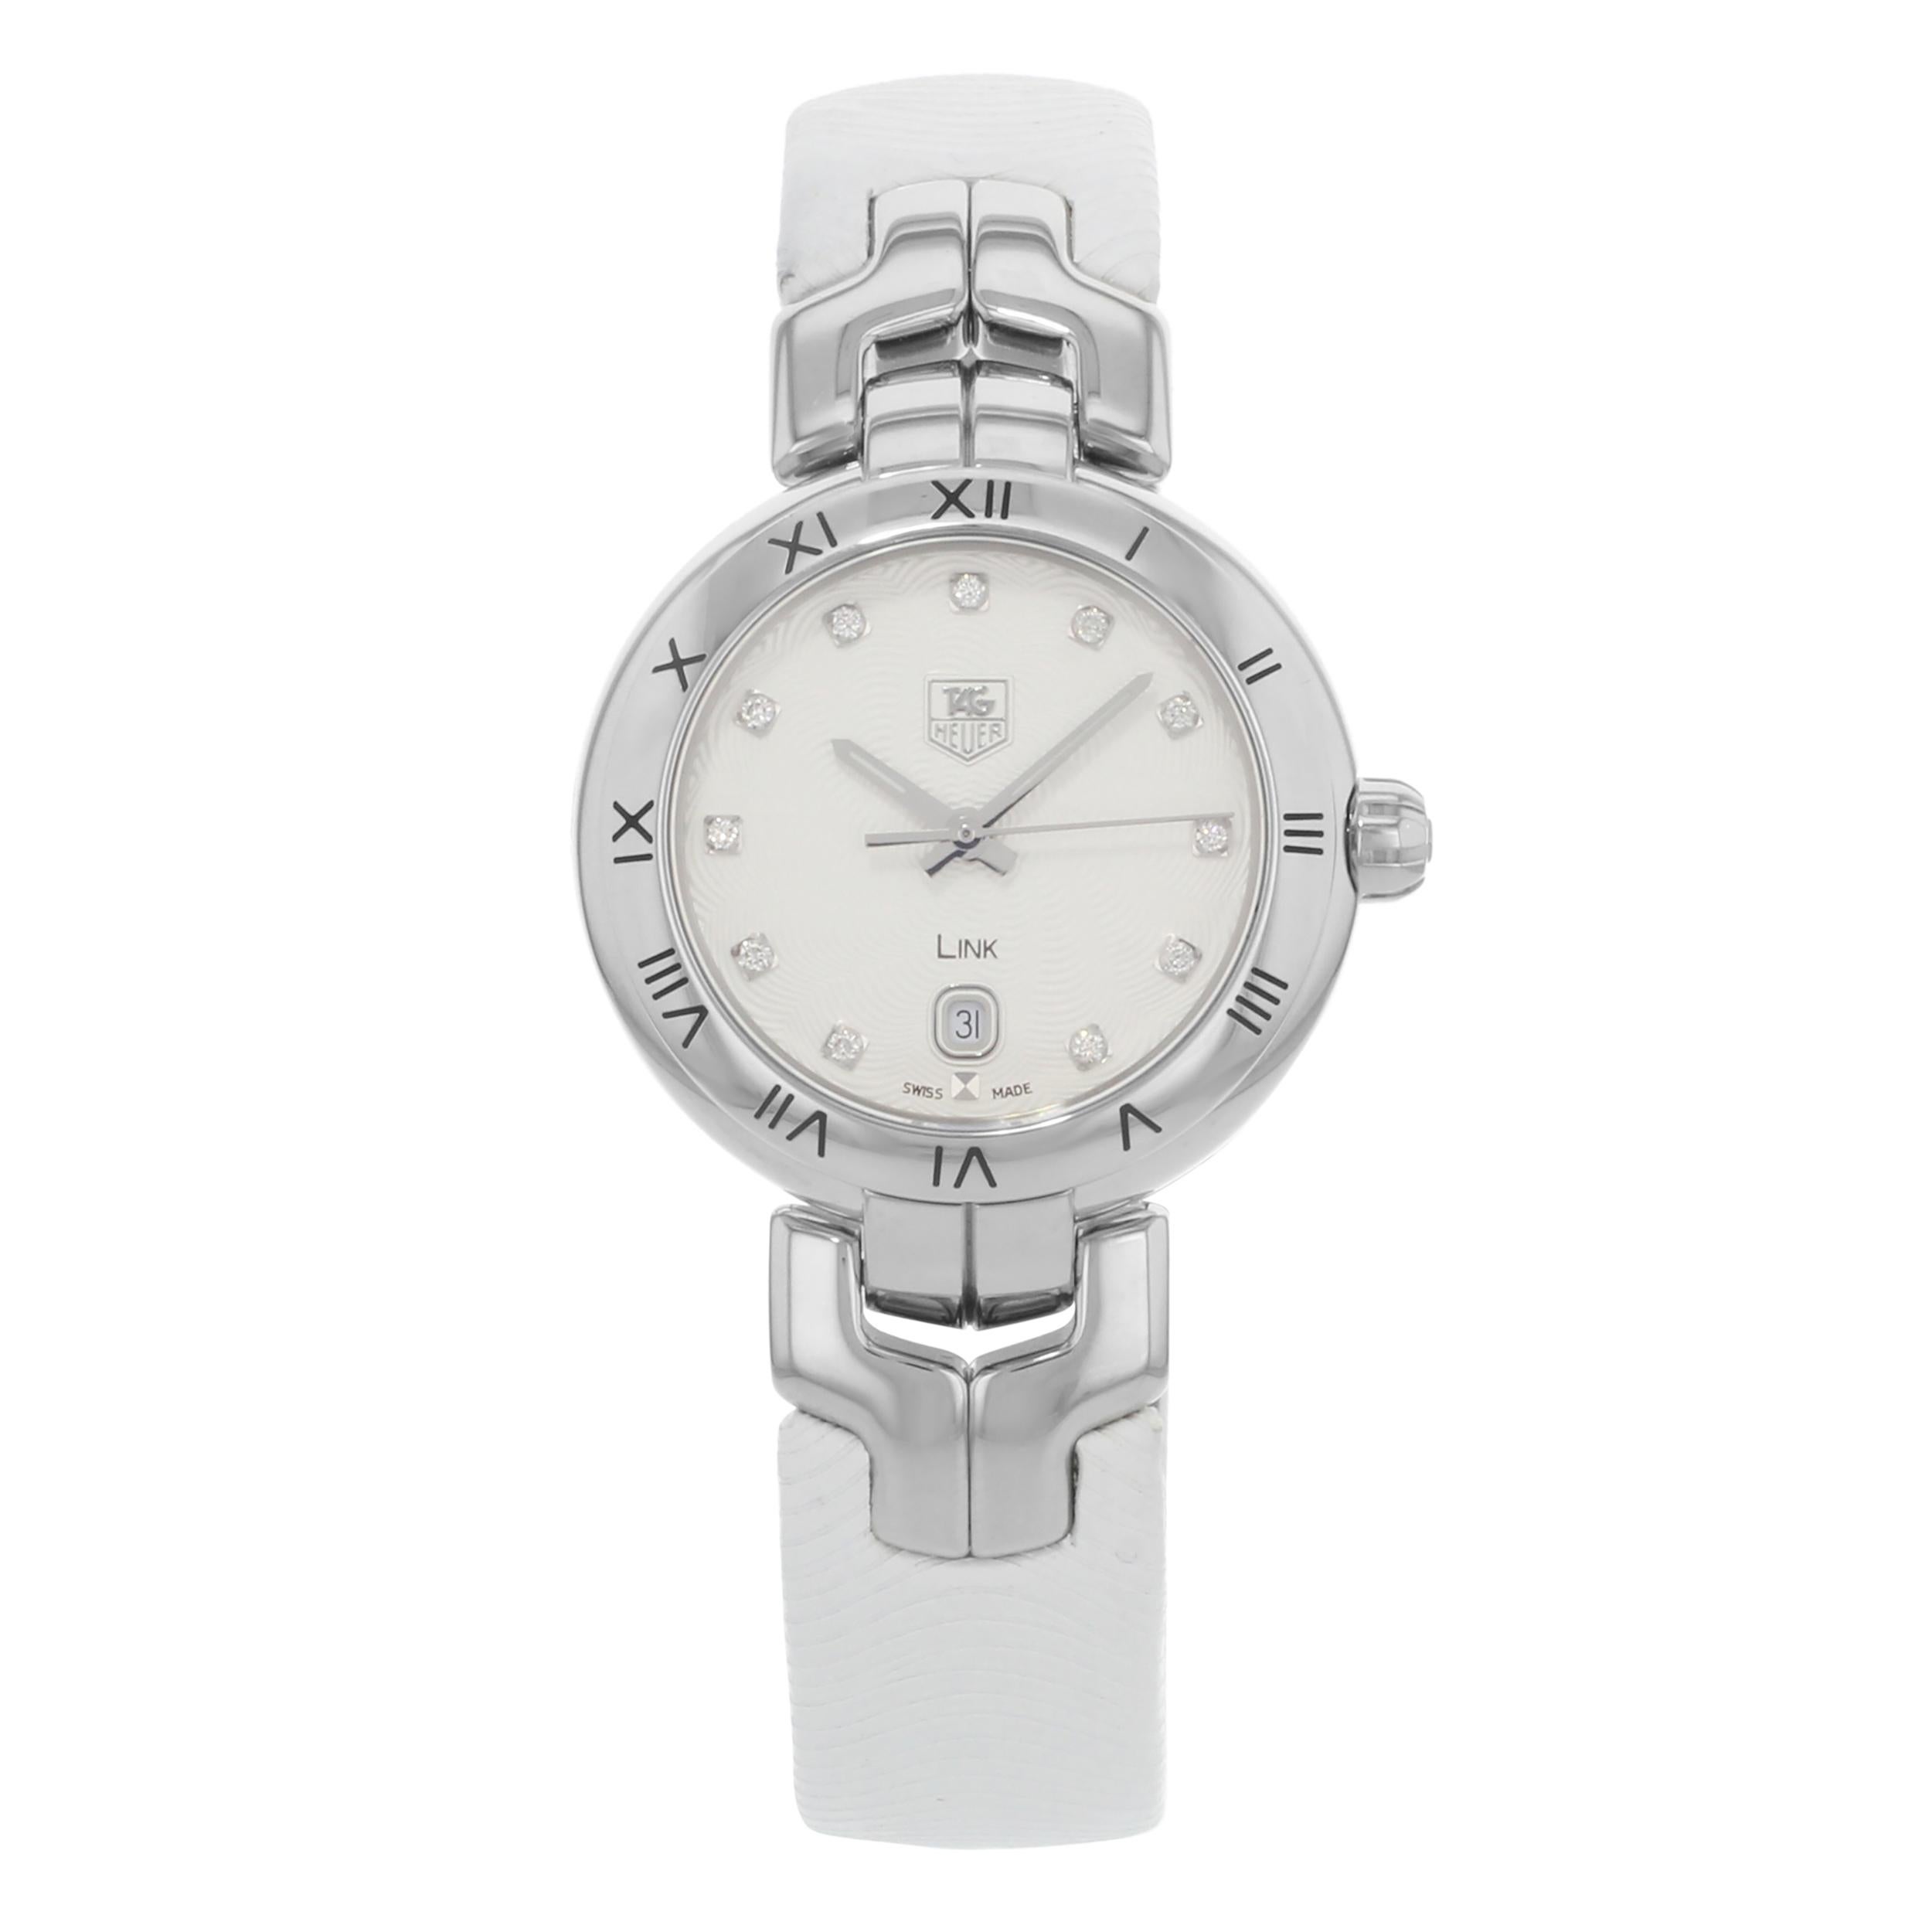 This display model TAG Heuer Link WAT1411.FC6316 is a beautiful Ladies timepiece that is powered by a quartz movement which is cased in a stainless steel case. It has a round shape face, diamonds dial and has hand diamonds style markers. It is